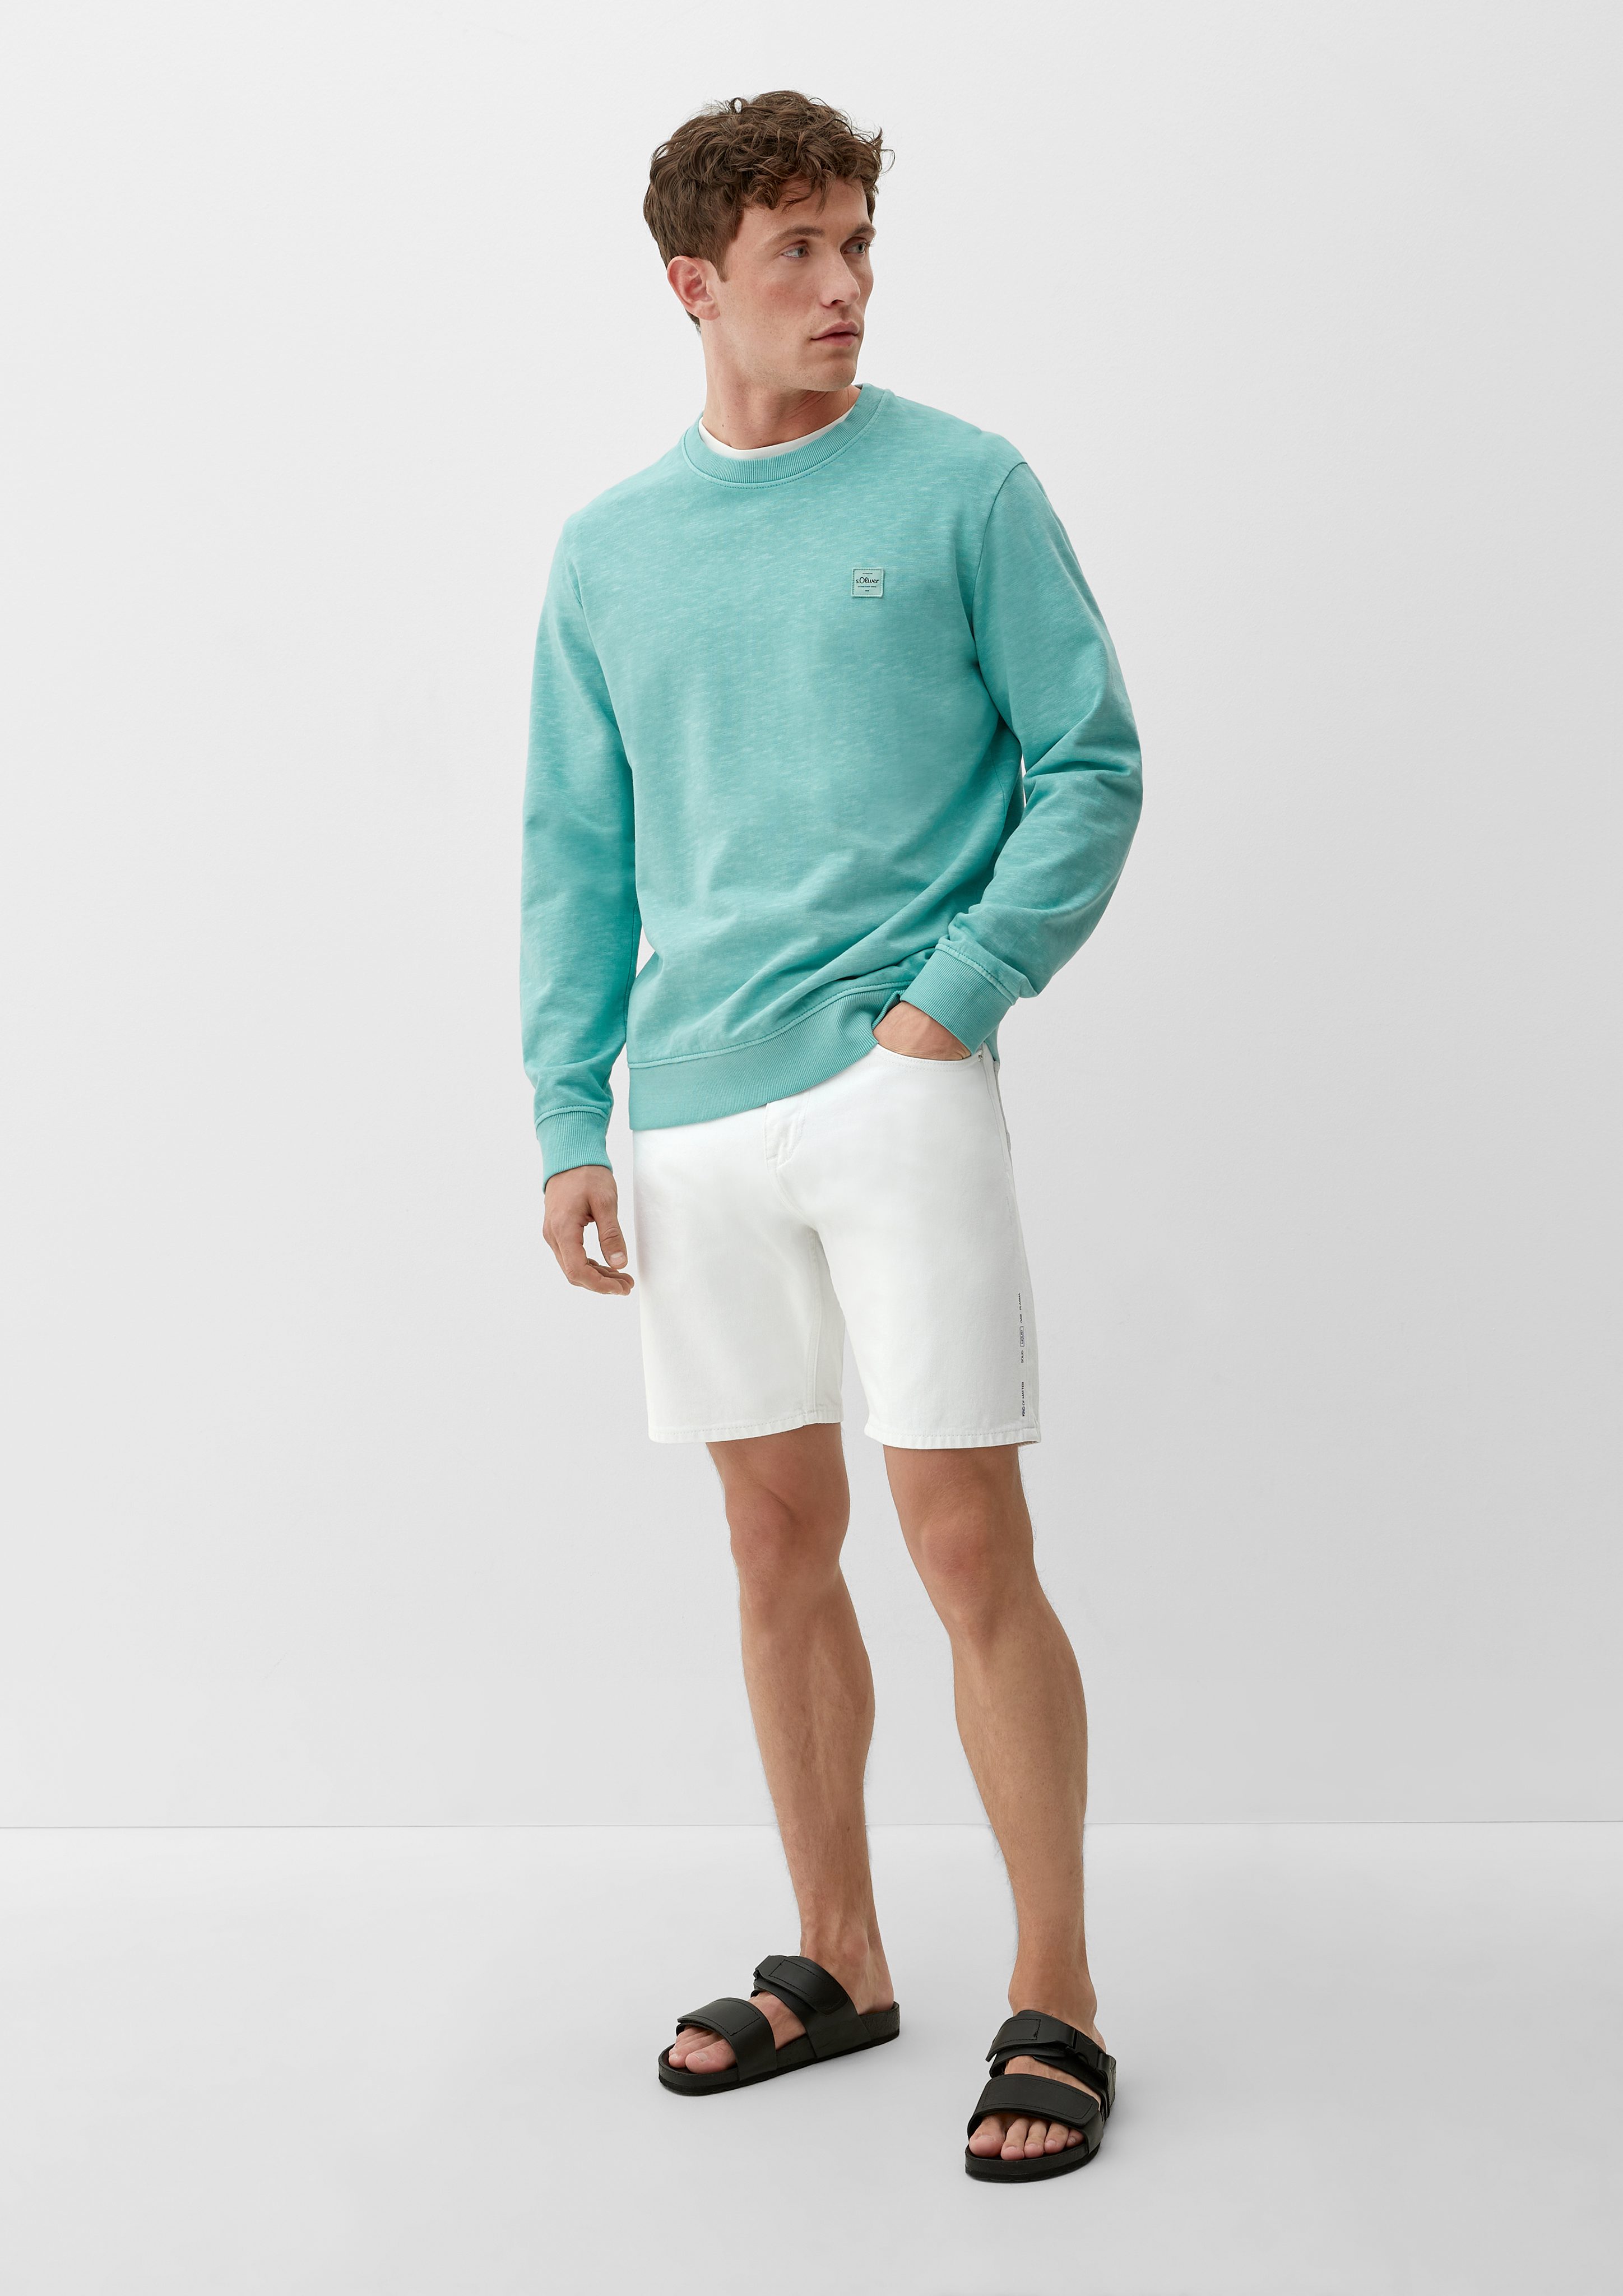 Regular Fit Rise Straight / Jeansshorts / Mid Jeans-Shorts s.Oliver / Leg